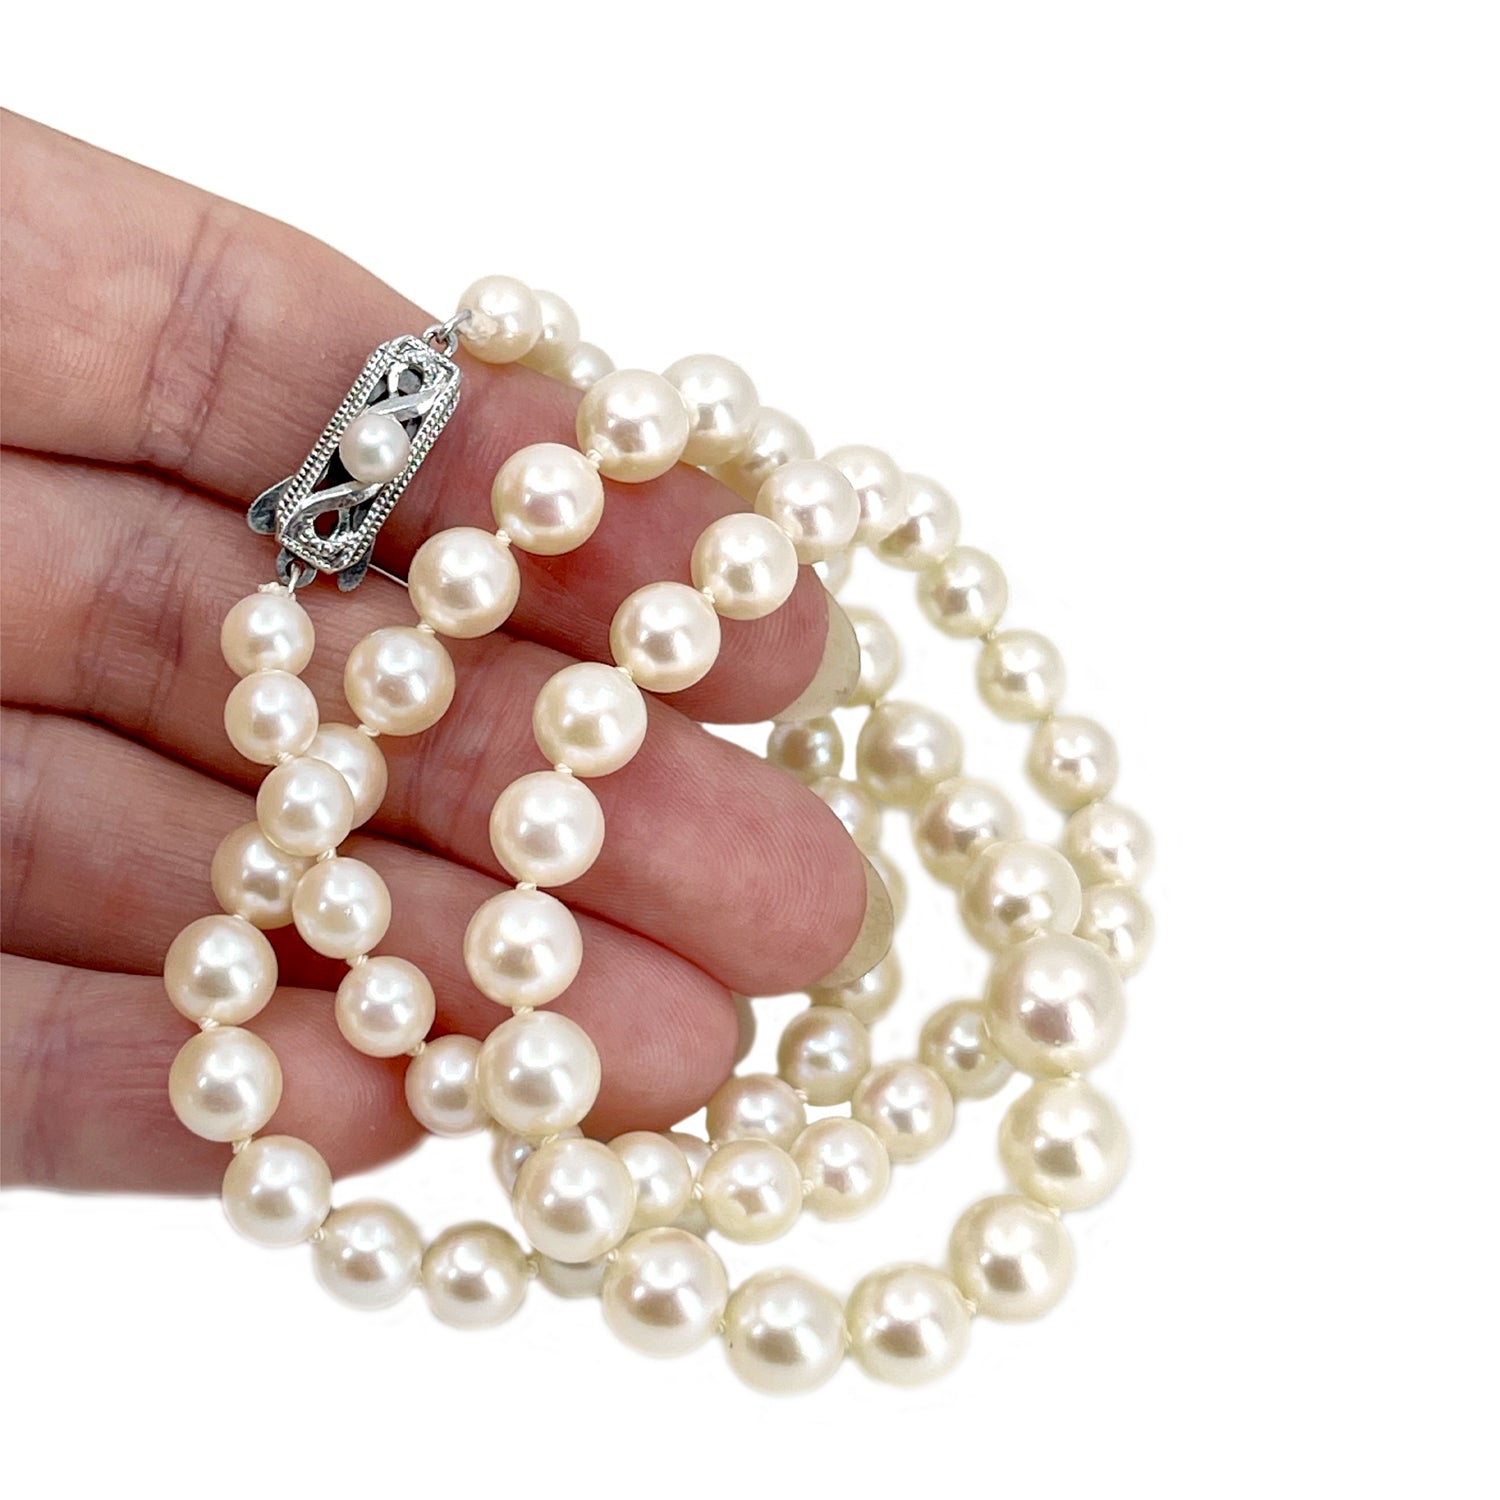 Rare Vintage Mikimoto Graduated Japanese Cultured Akoya Pearl Beaded Strand - Sterling Silver 19 Inch